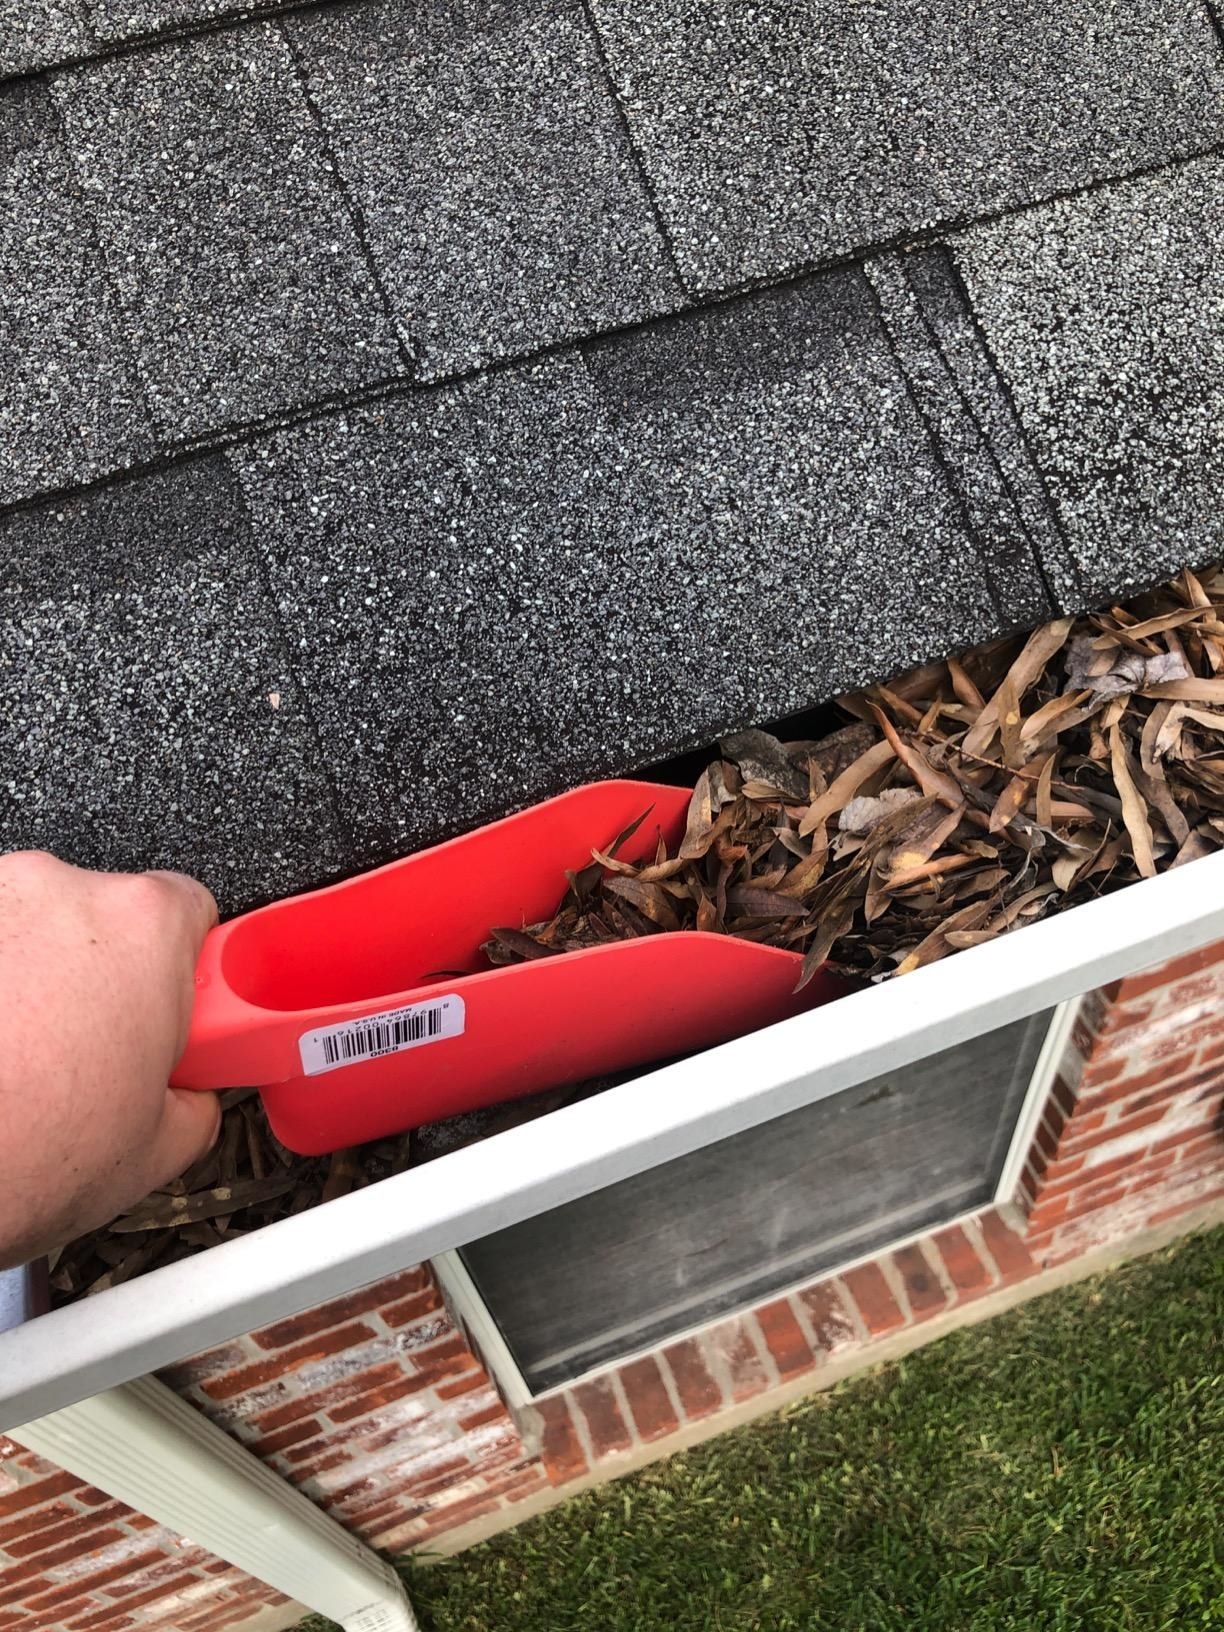 Reviewer using the red scoop to remove leaves from their gutter